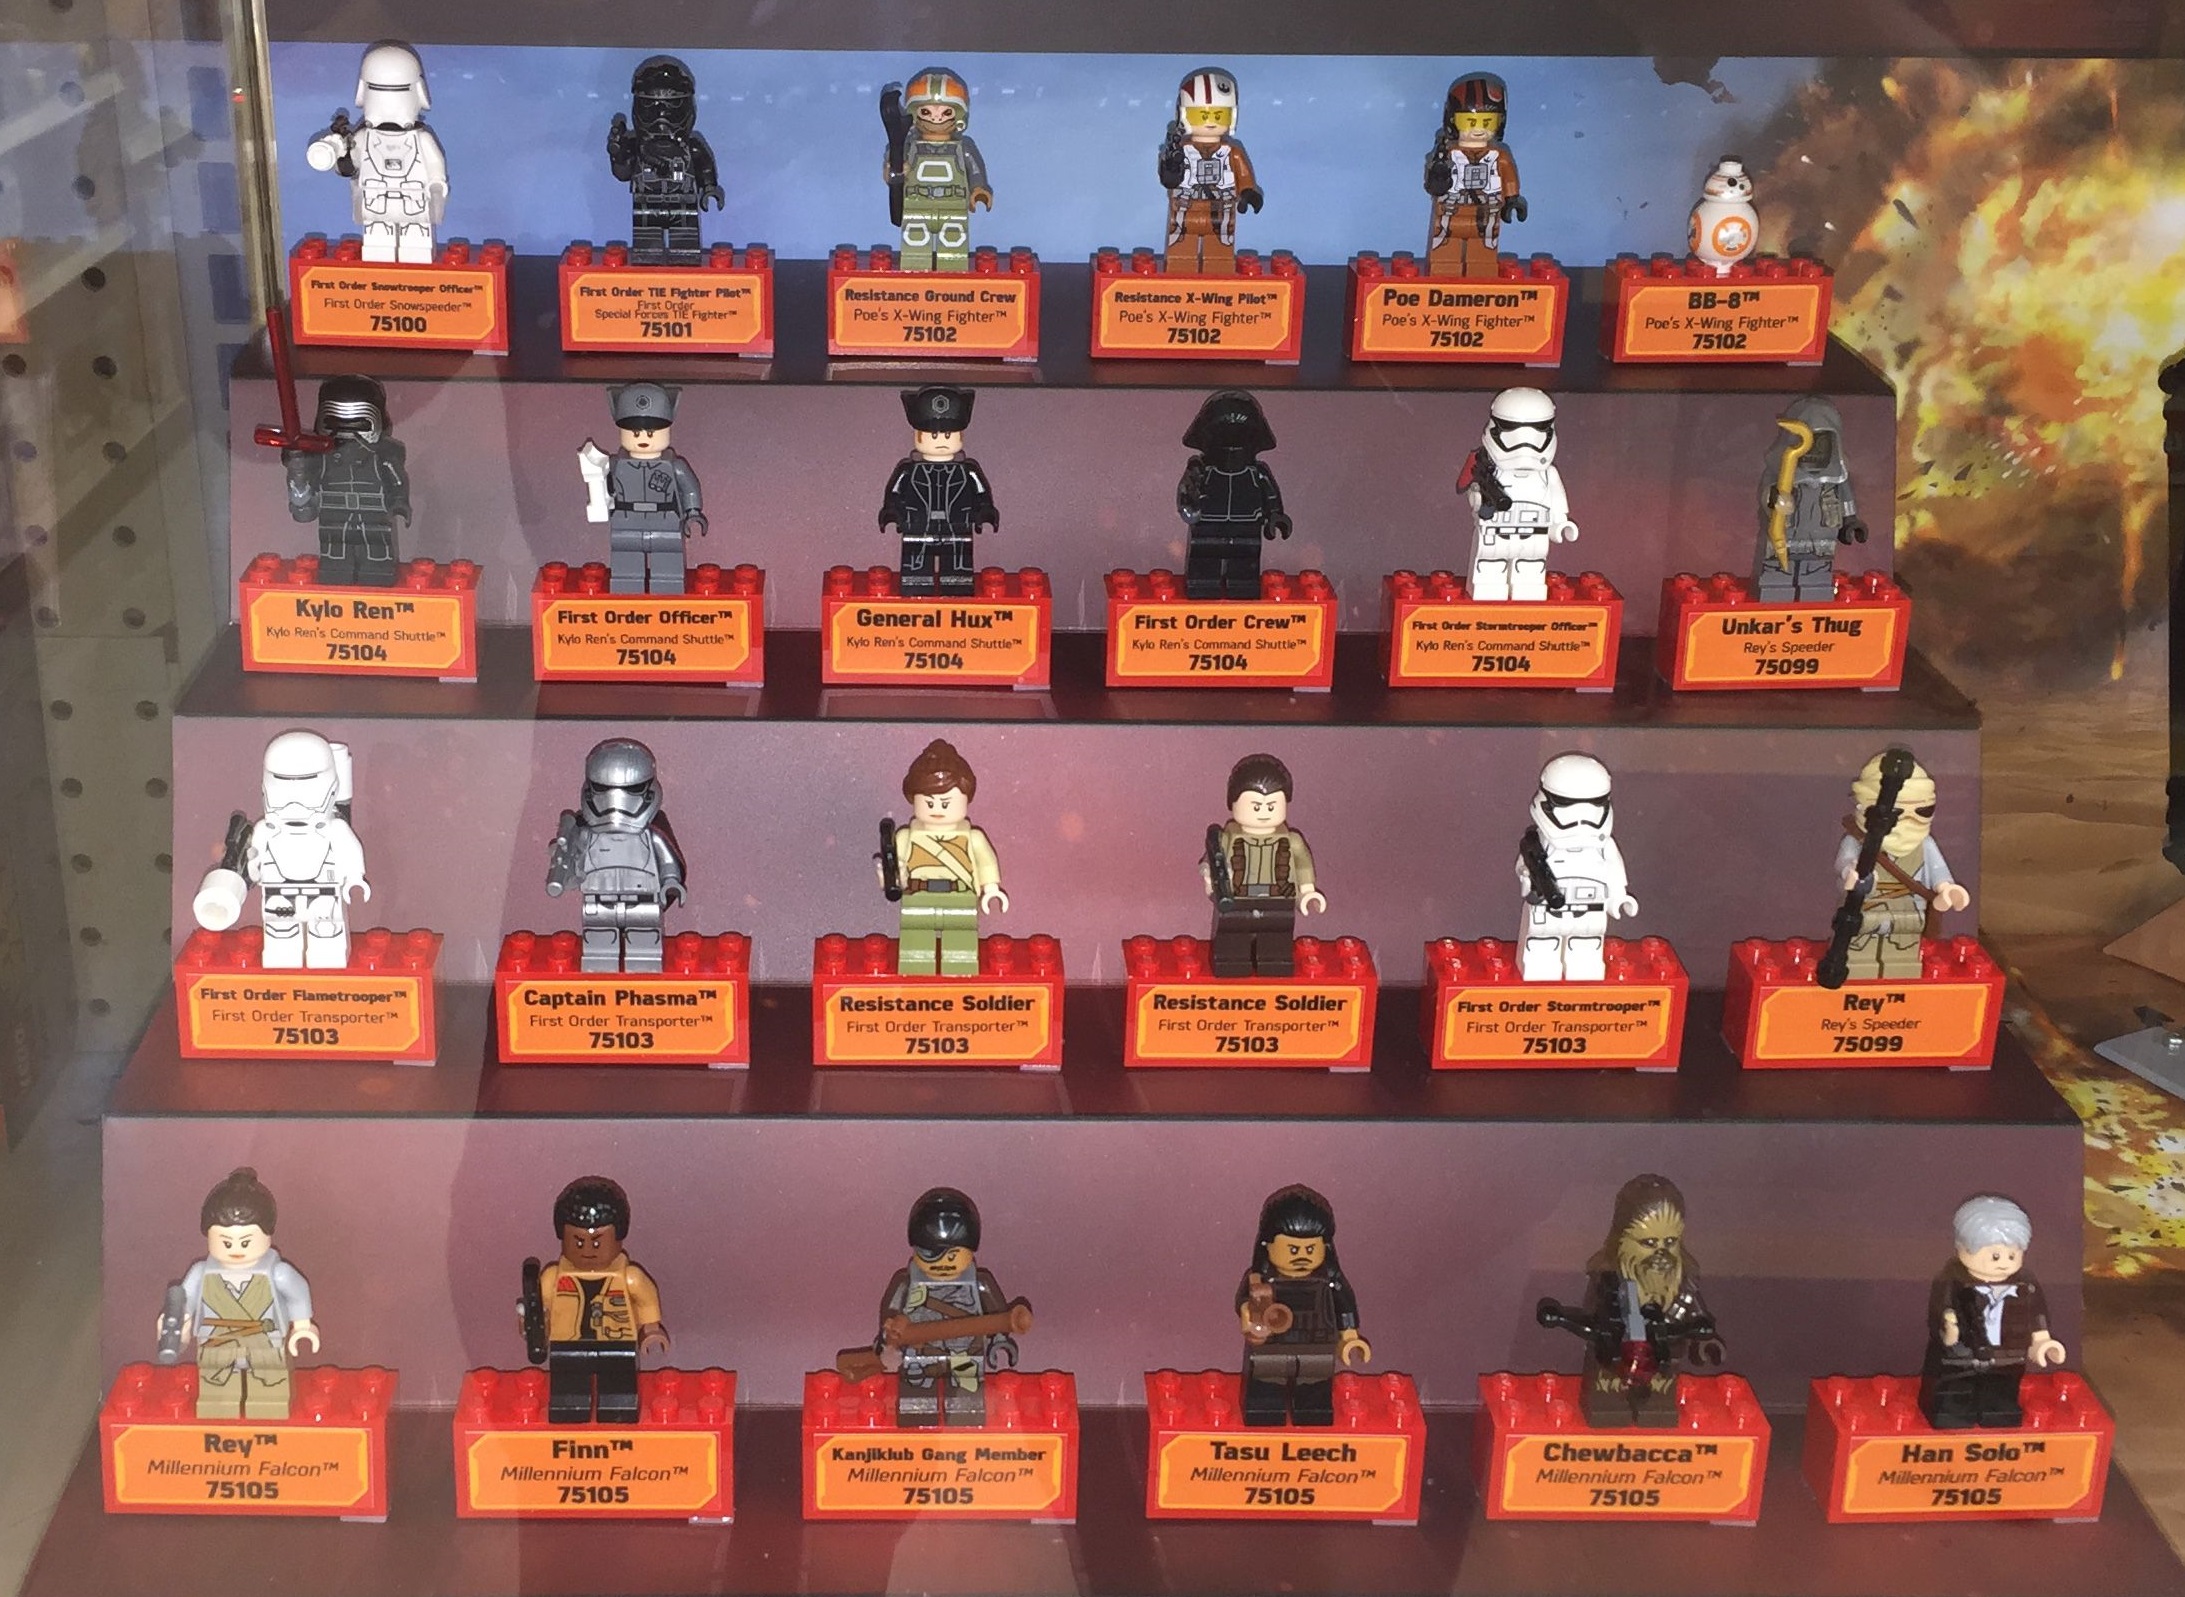 Lego Star Wars Minifigure Display in Toys R Us - Do you see the missing Figure? - Minifigure